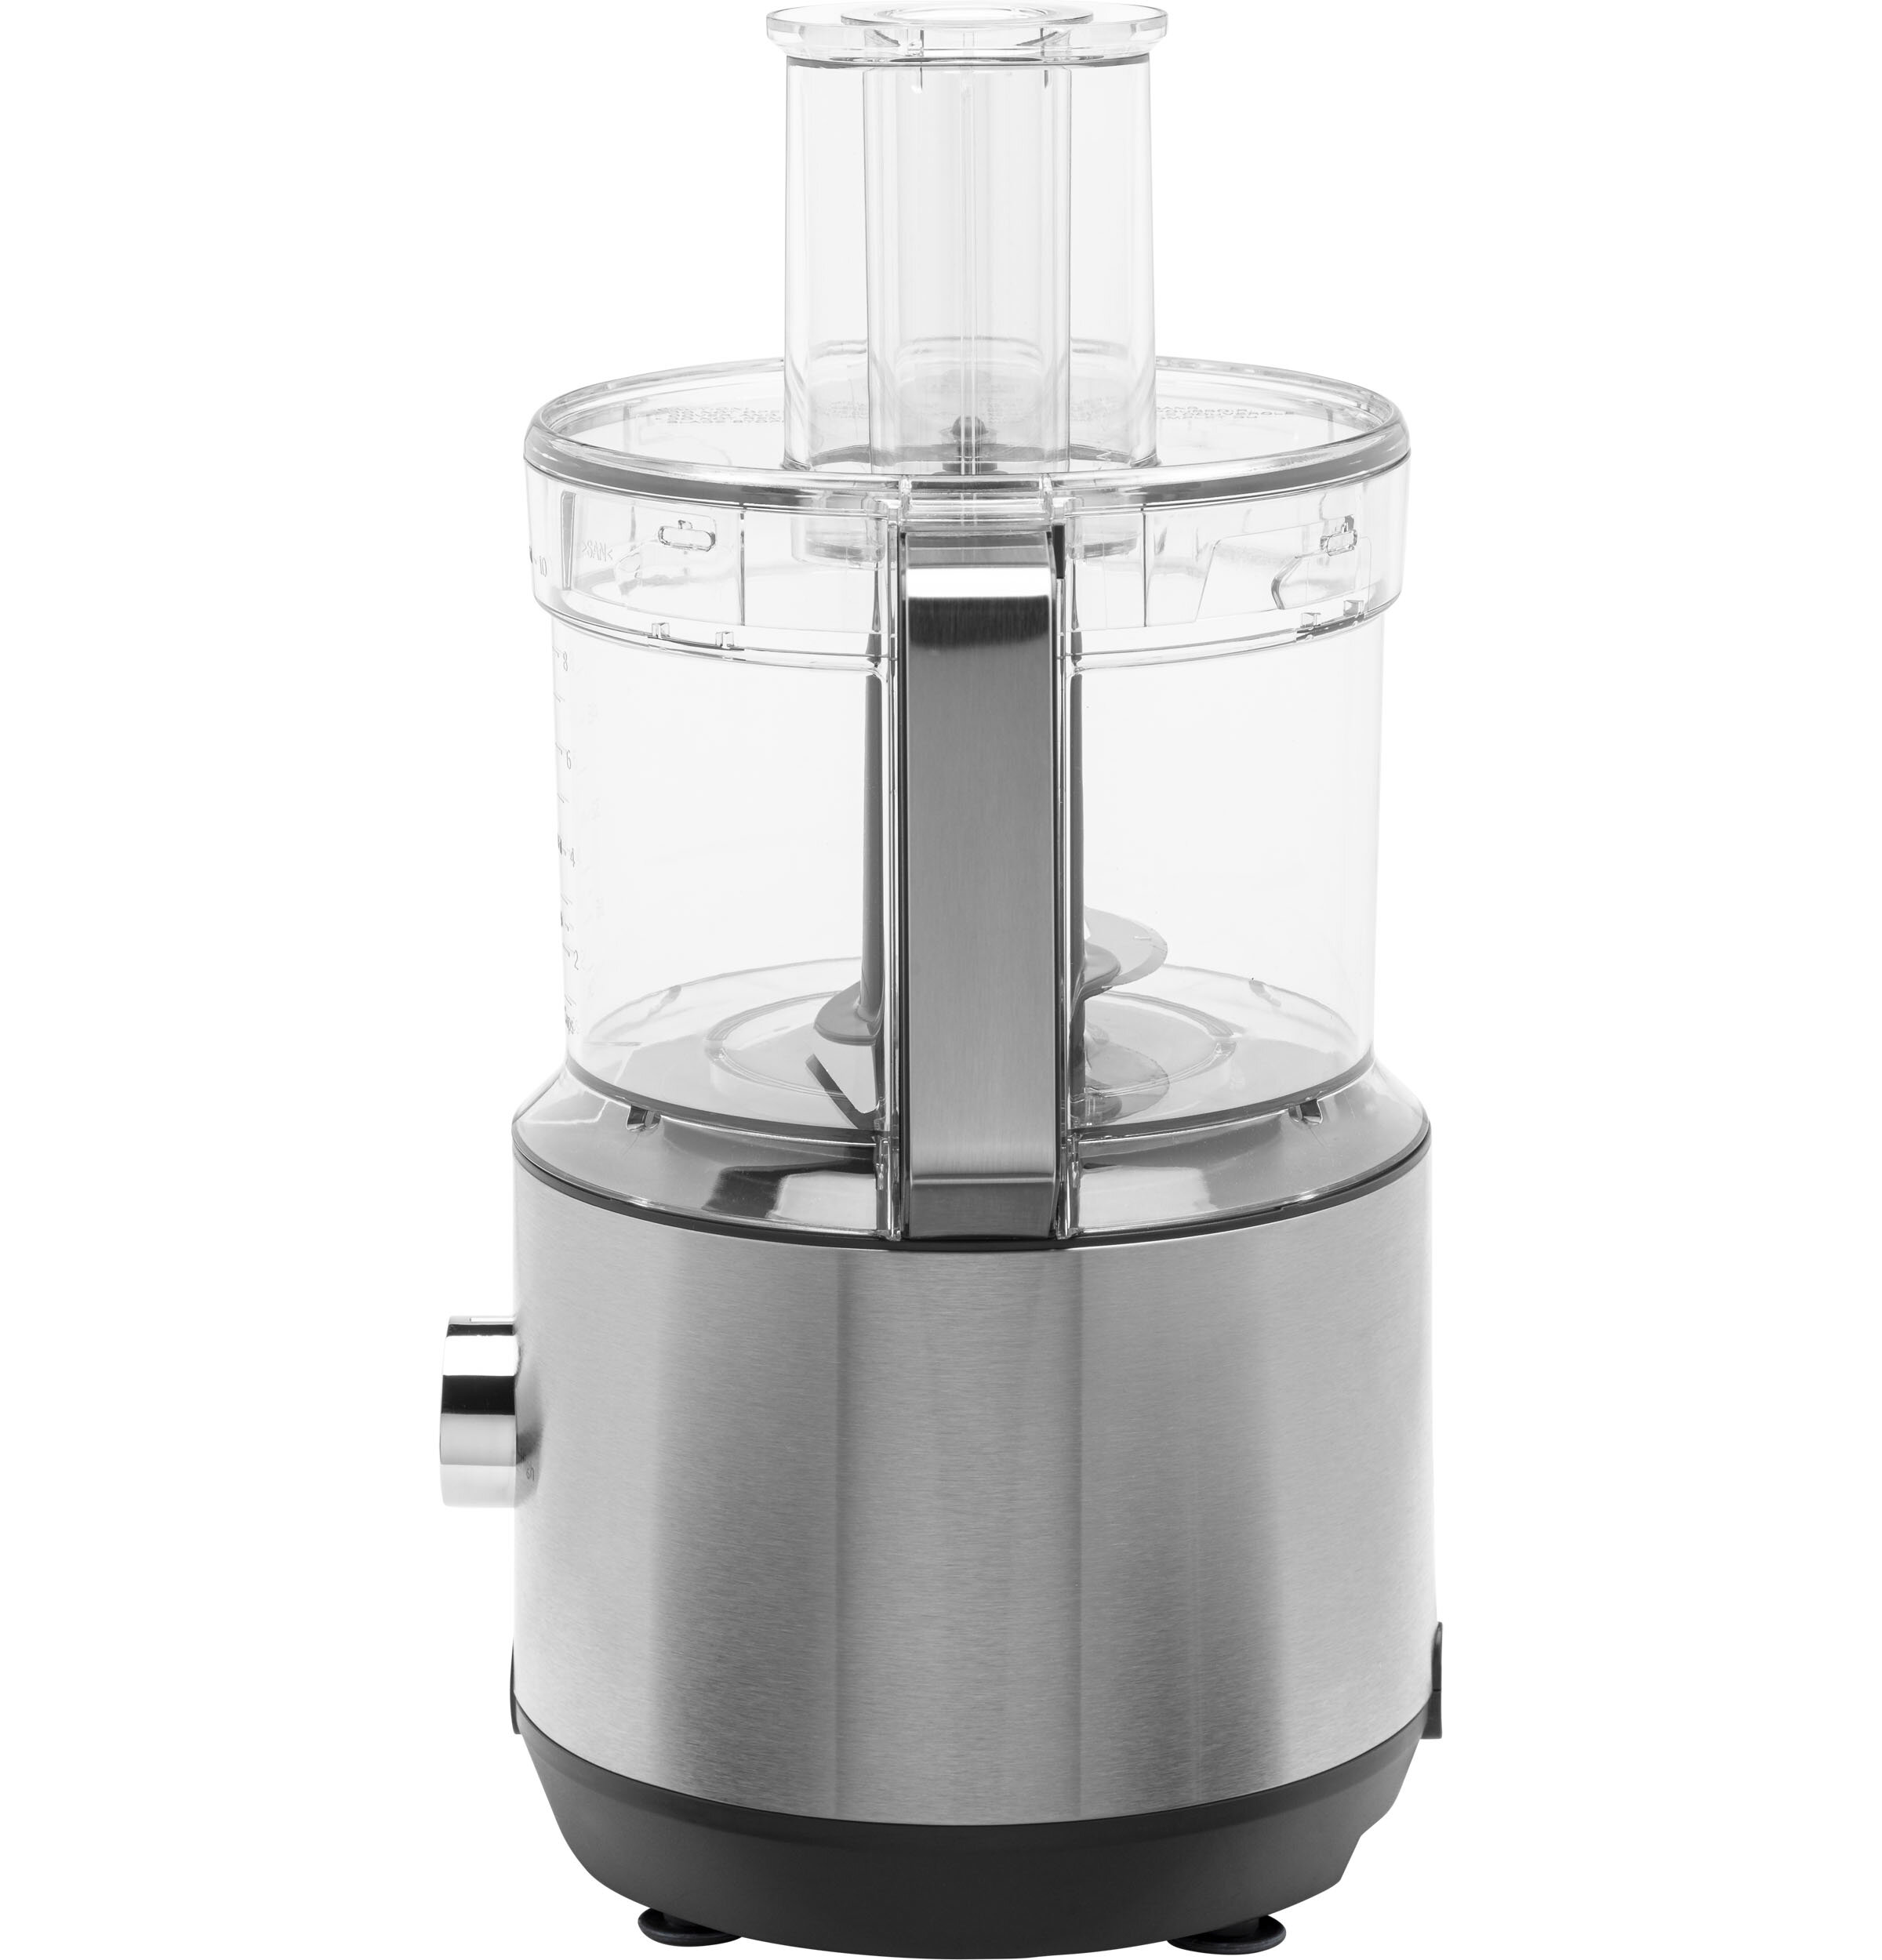 GE Appliances 12-Cup Food Processor with Accessories & Reviews